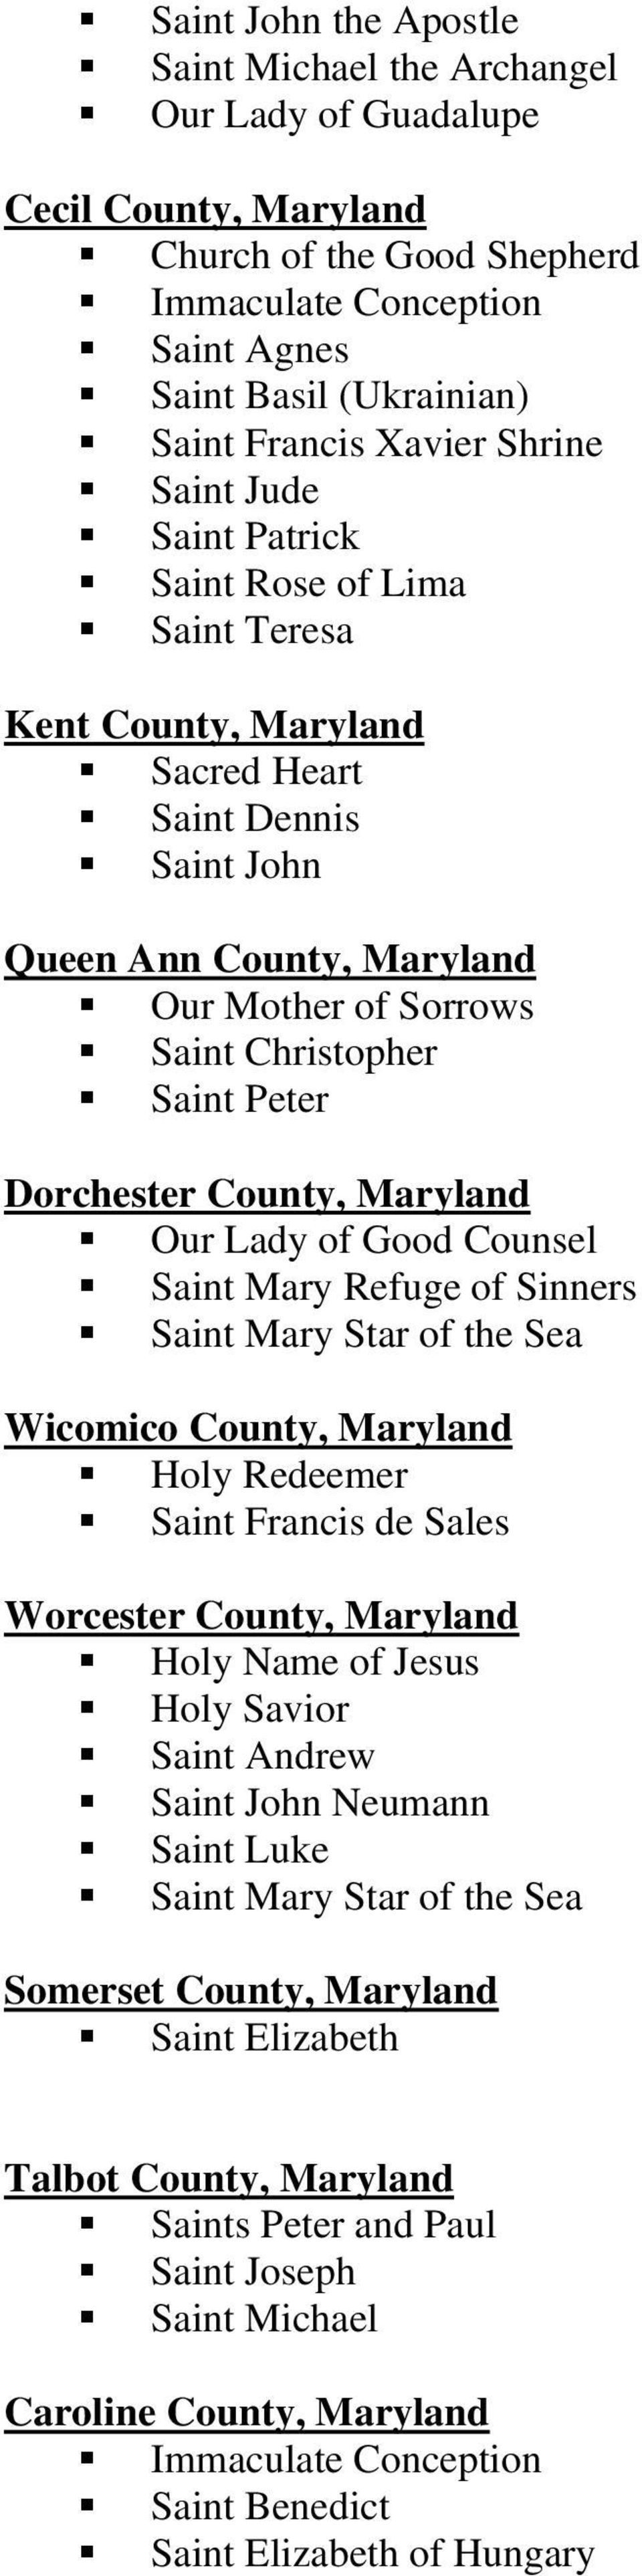 Saint Peter Dorchester County, Maryland Our Lady of Good Counsel Saint Mary Refuge of Sinners Saint Mary Star of the Sea Wicomico County, Maryland Holy Redeemer Saint Francis de Sales Worcester